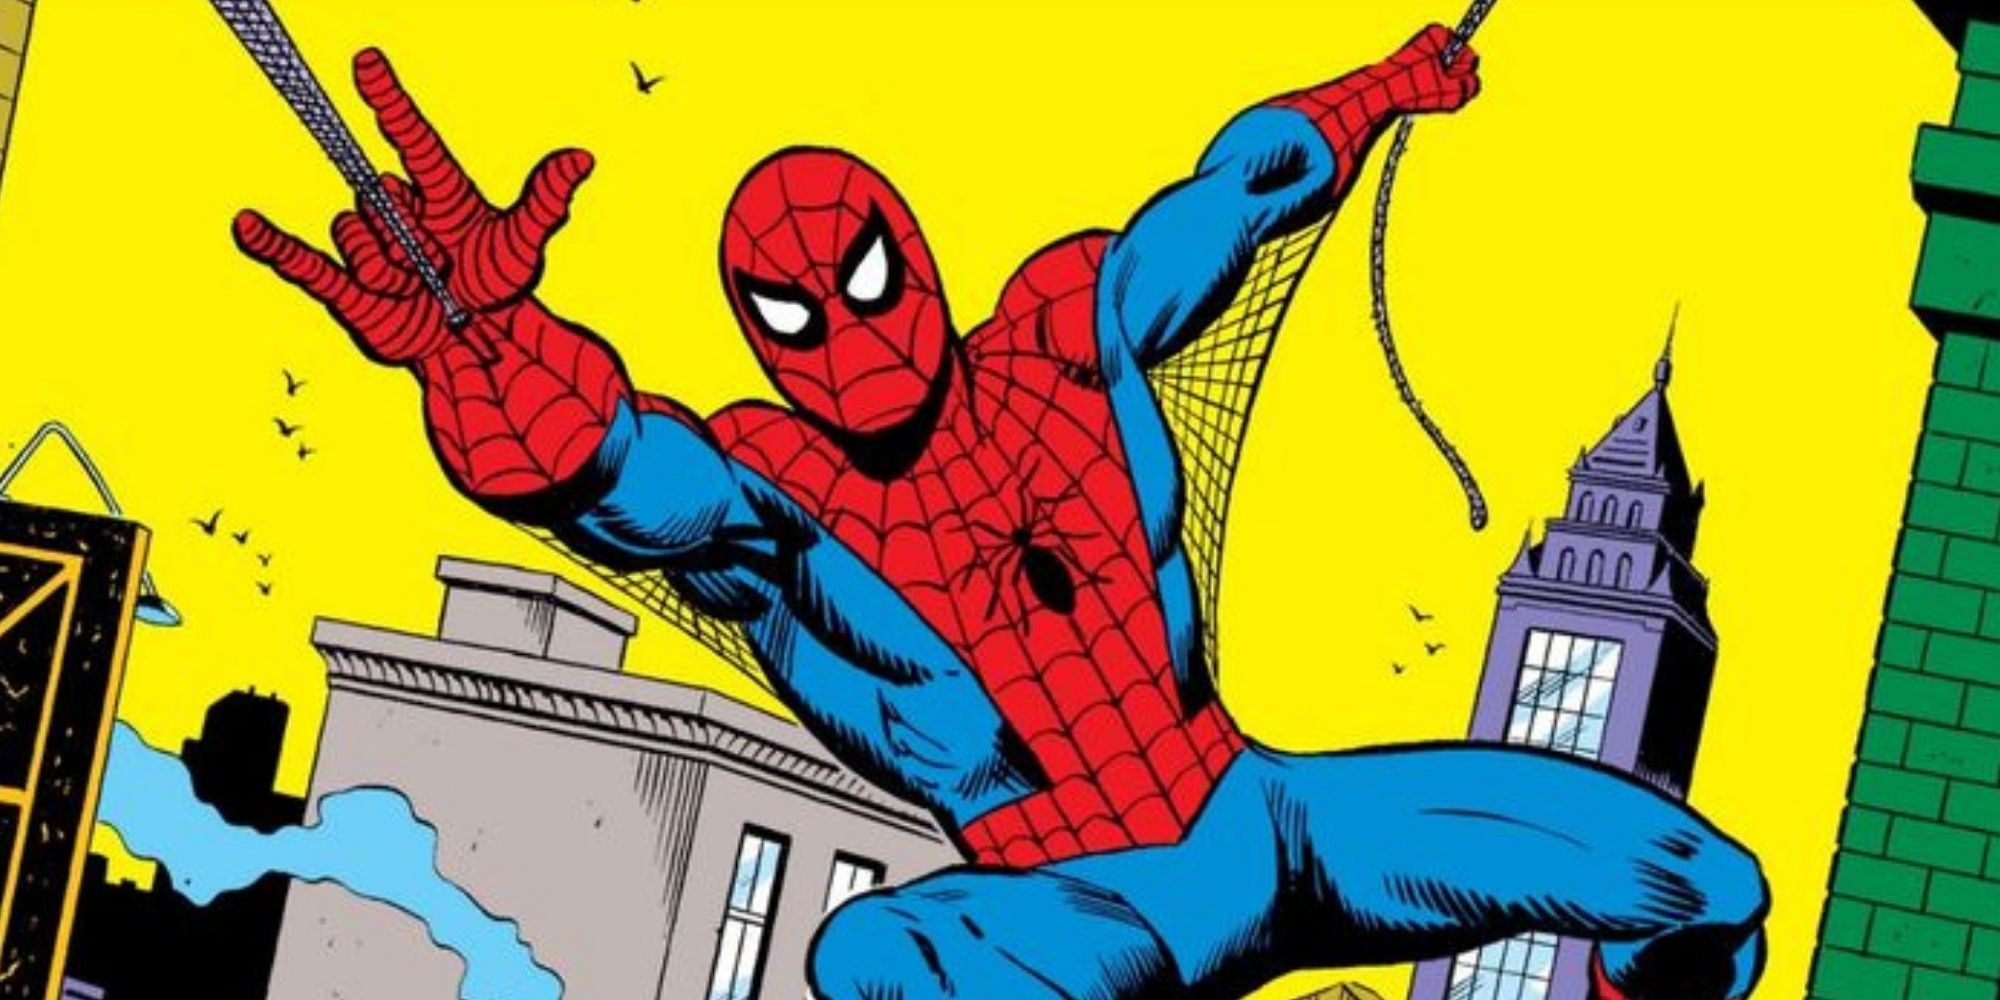 Spider-Man swinging with his webs in a Silver Age comic